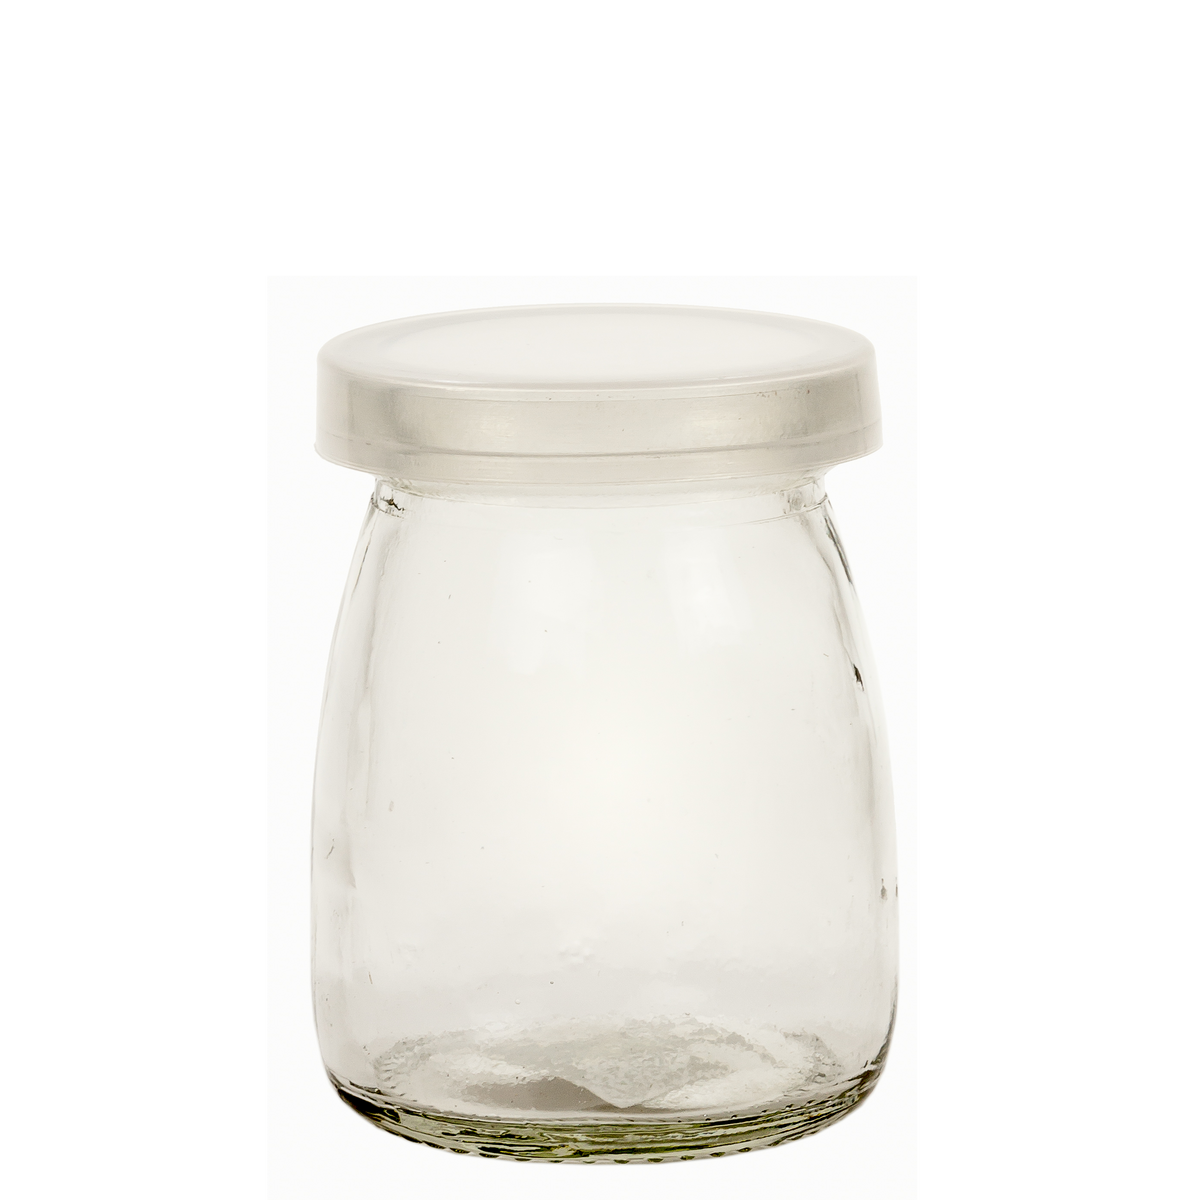 Enjoy dessert in one of Kate's Kitchen's cute wee dessert jars. Fill with cheesecakes, possets or icecream for the pefect sweet conclusion to any meal